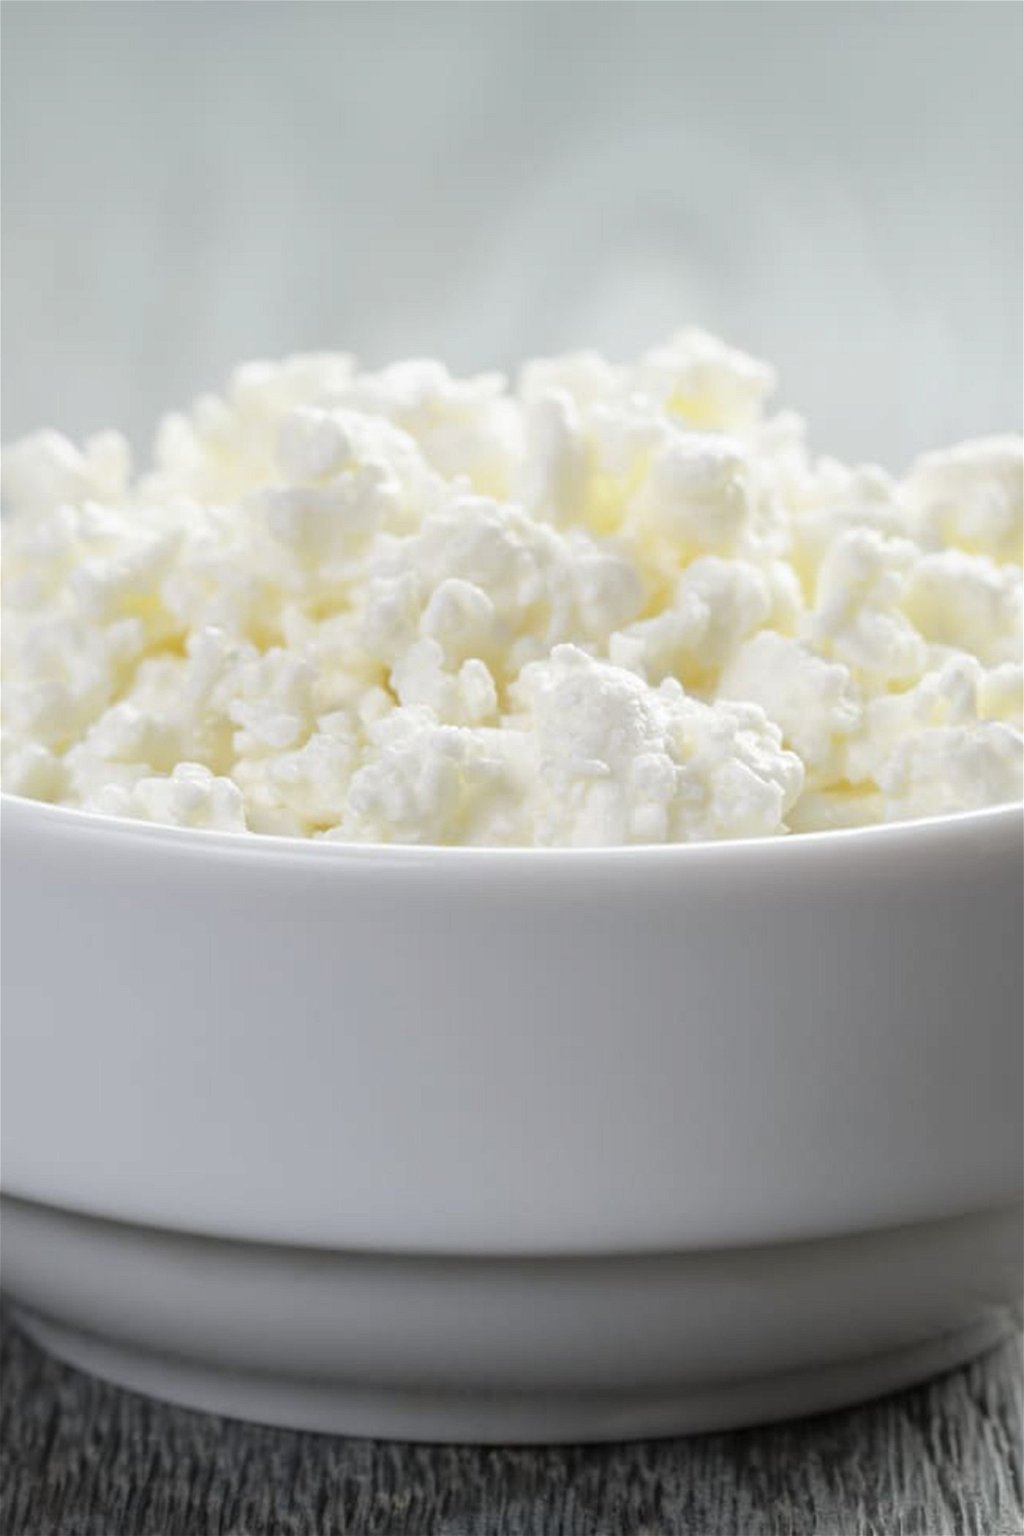 https://media.theproteinchef.co/wp-content/uploads/2020/03/Five-Cottage-Cheese-Recipes.jpg